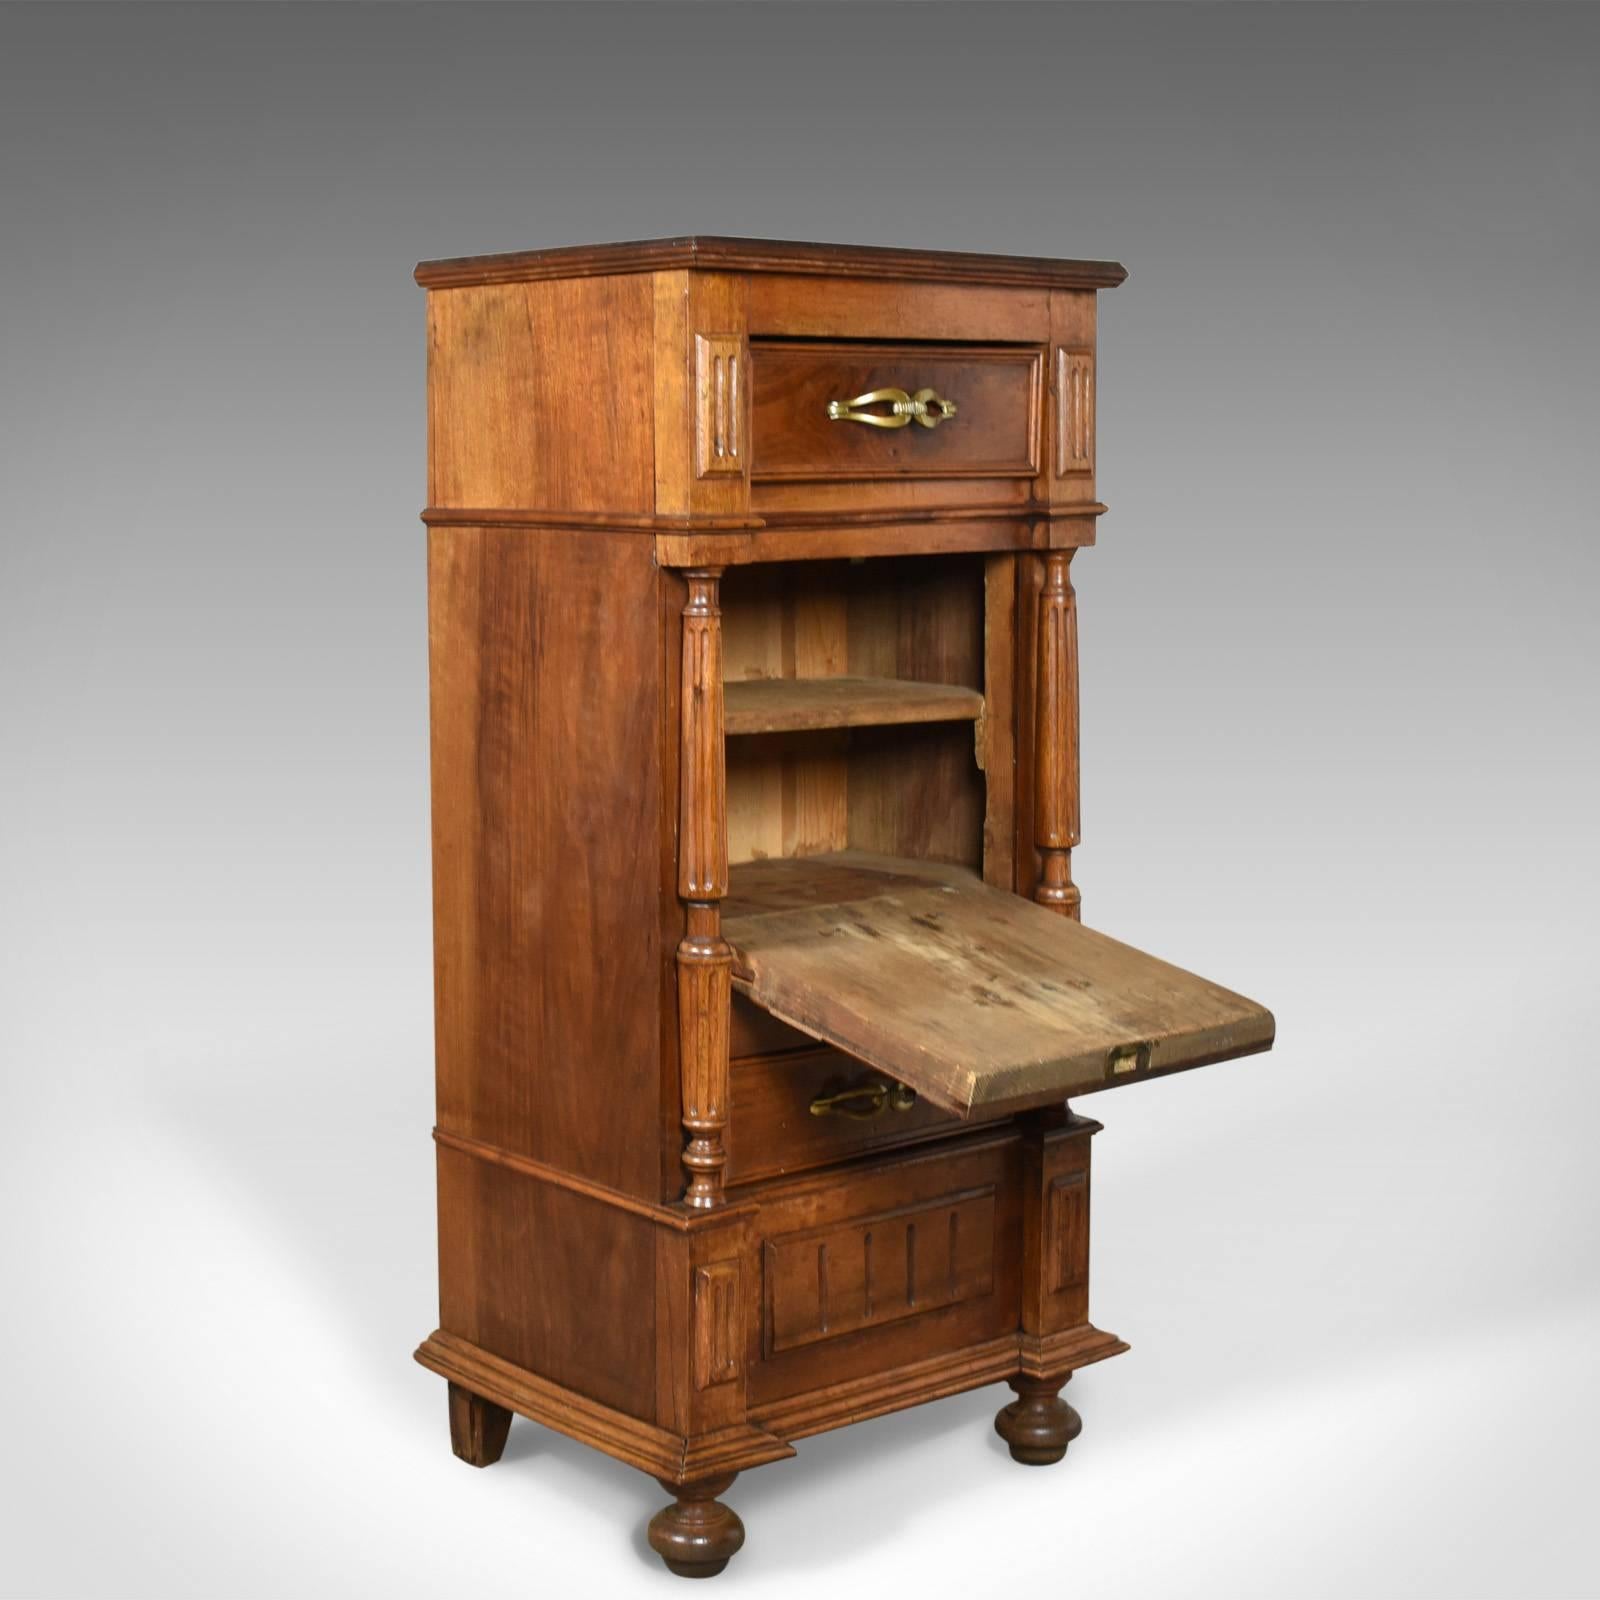 French Provincial French Antique Side Cabinet, Narrow Pot Cupboard, Nightstand, Walnut, Circa 1900